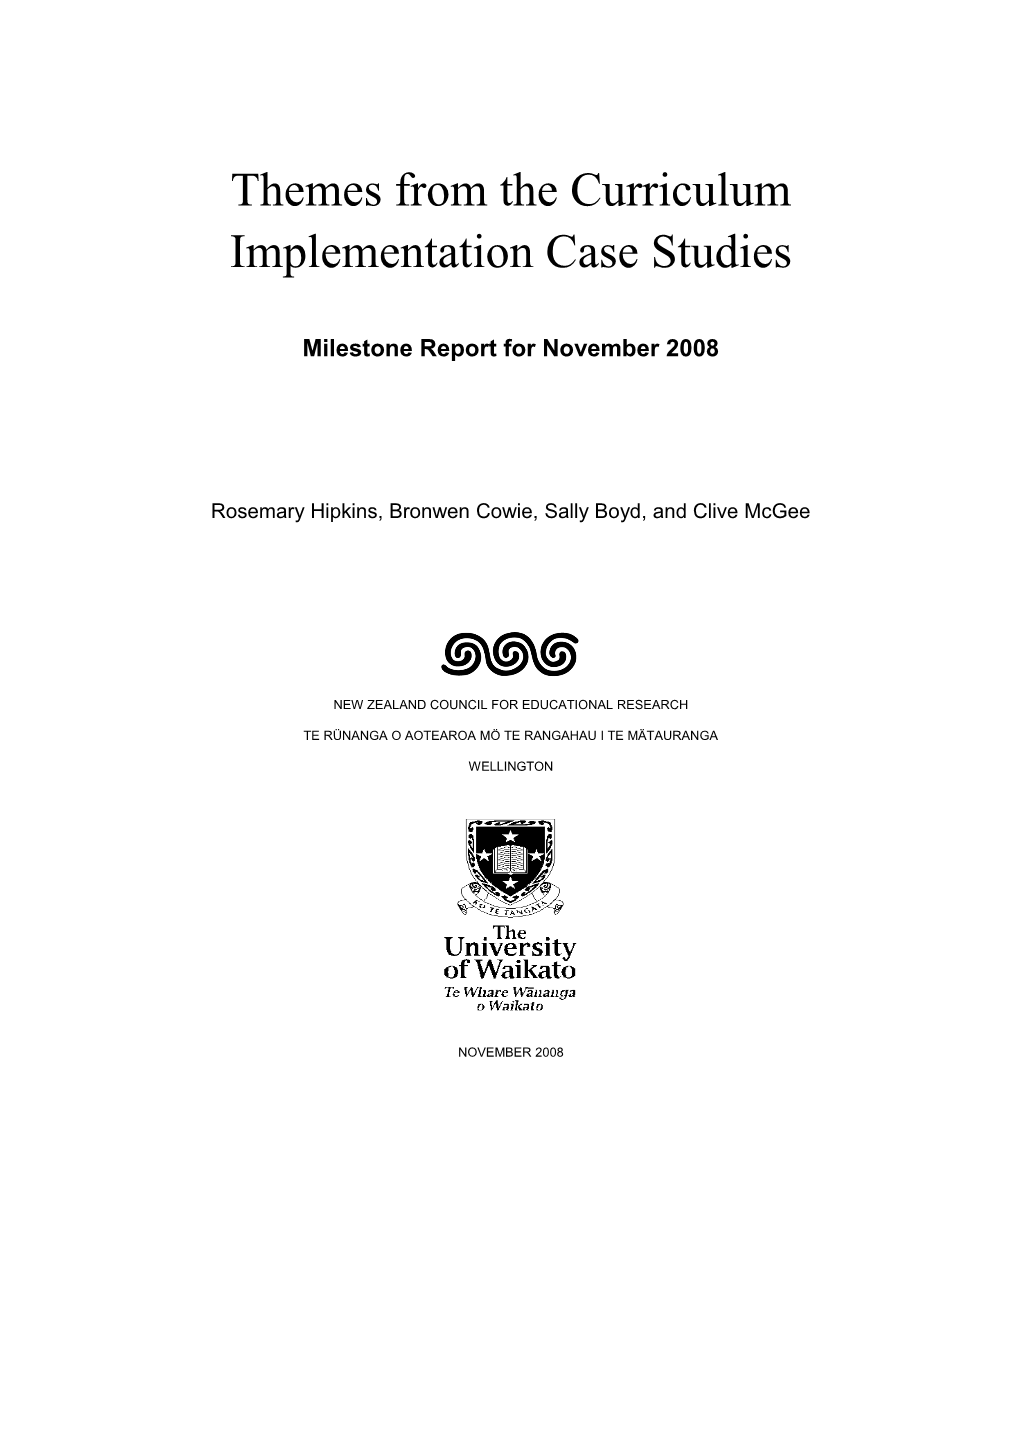 Themes from the Curriculum Implementation Case Studies